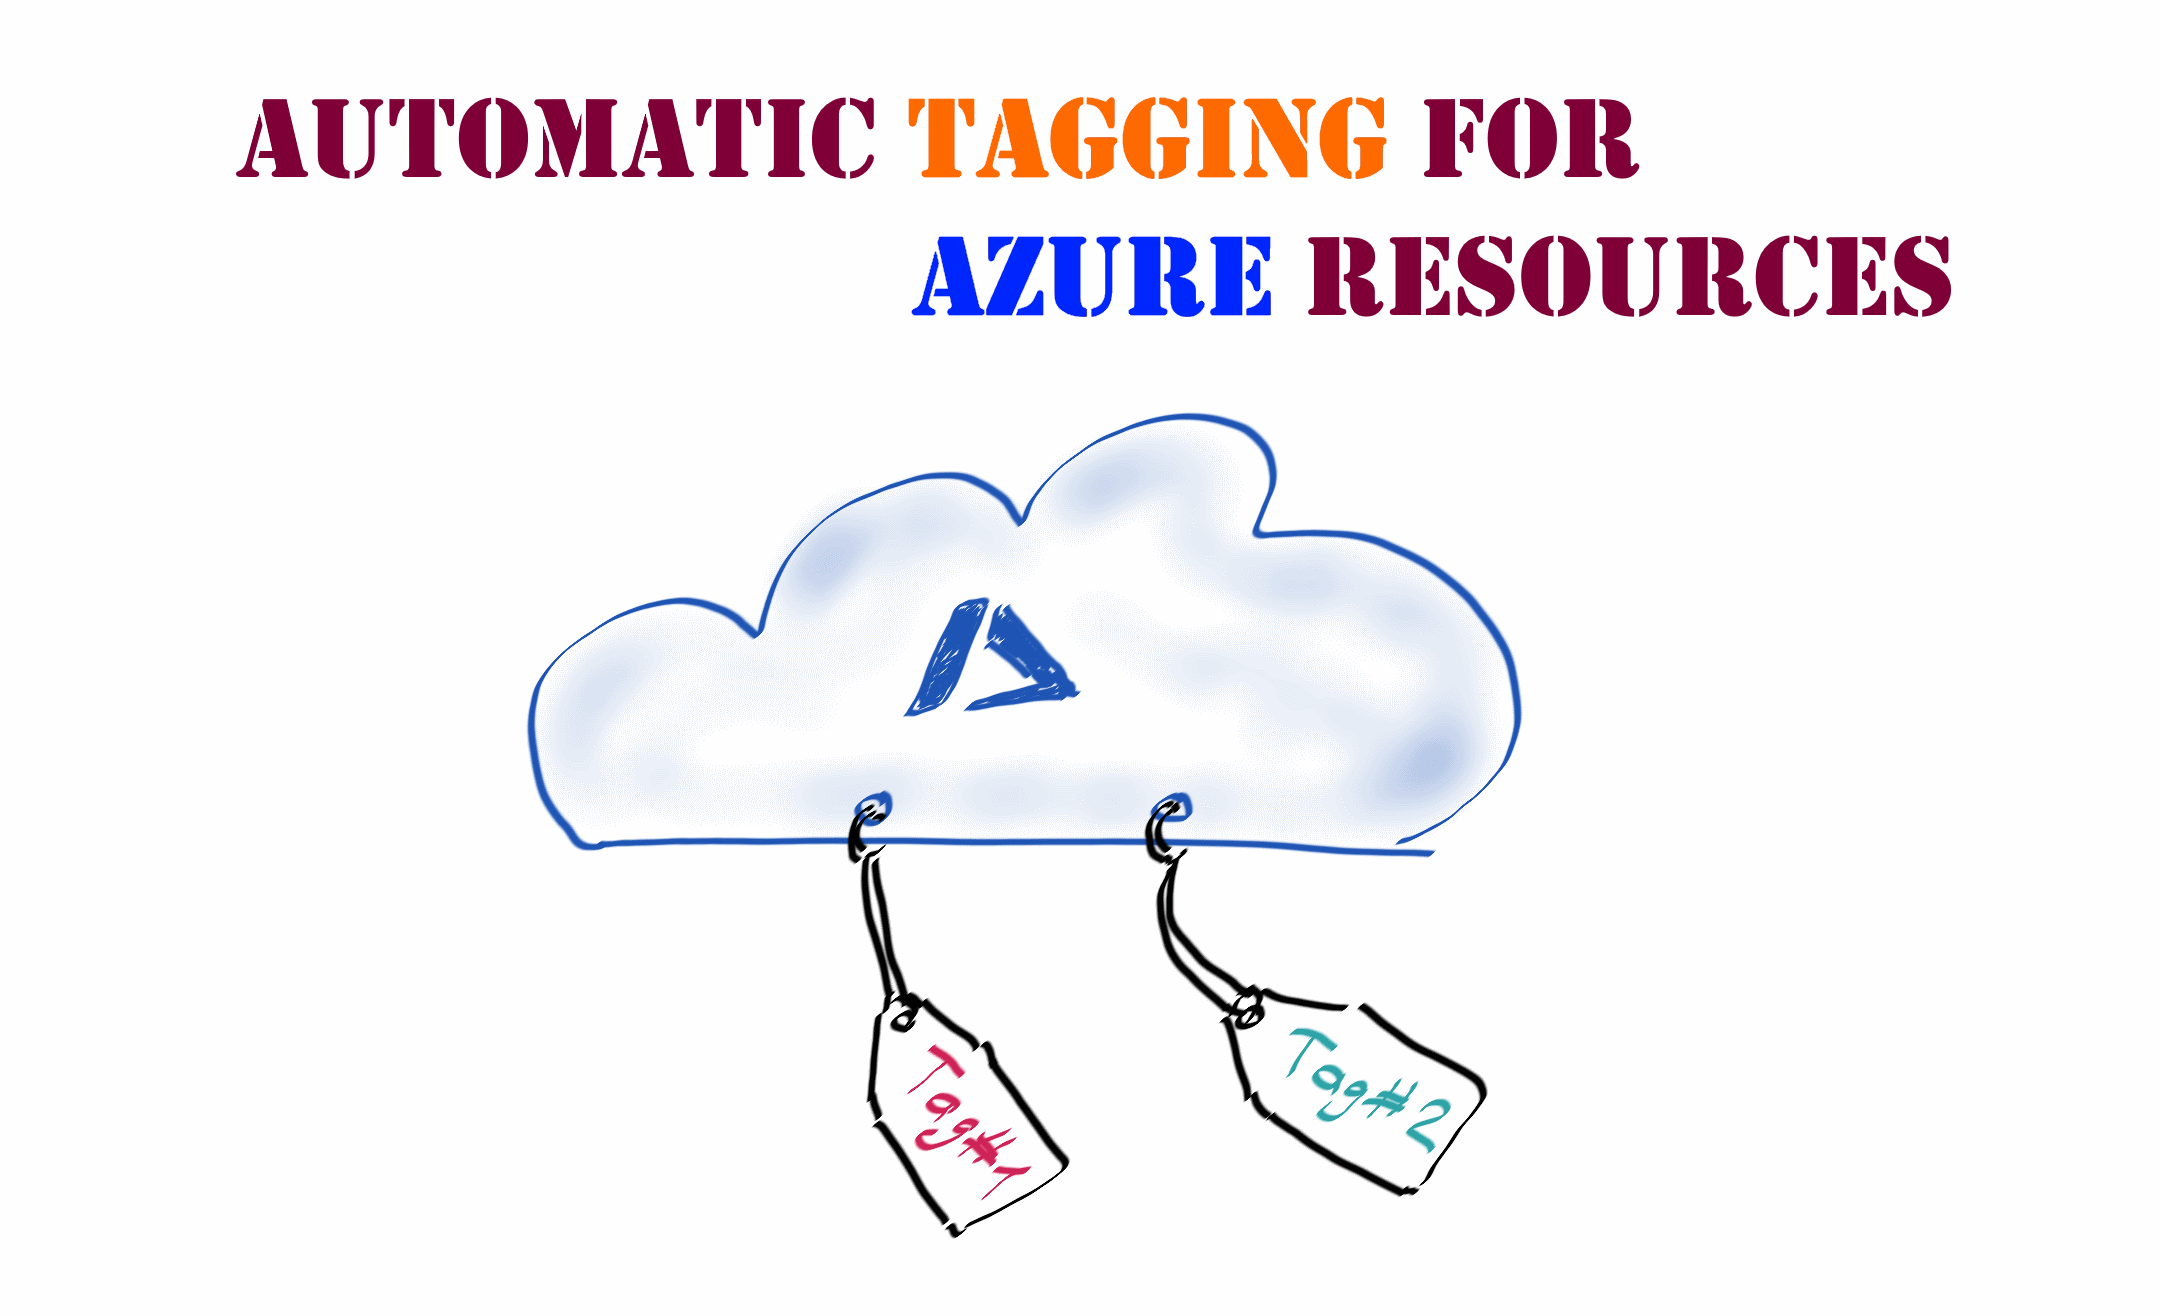 Automatic tagging for Azure resources